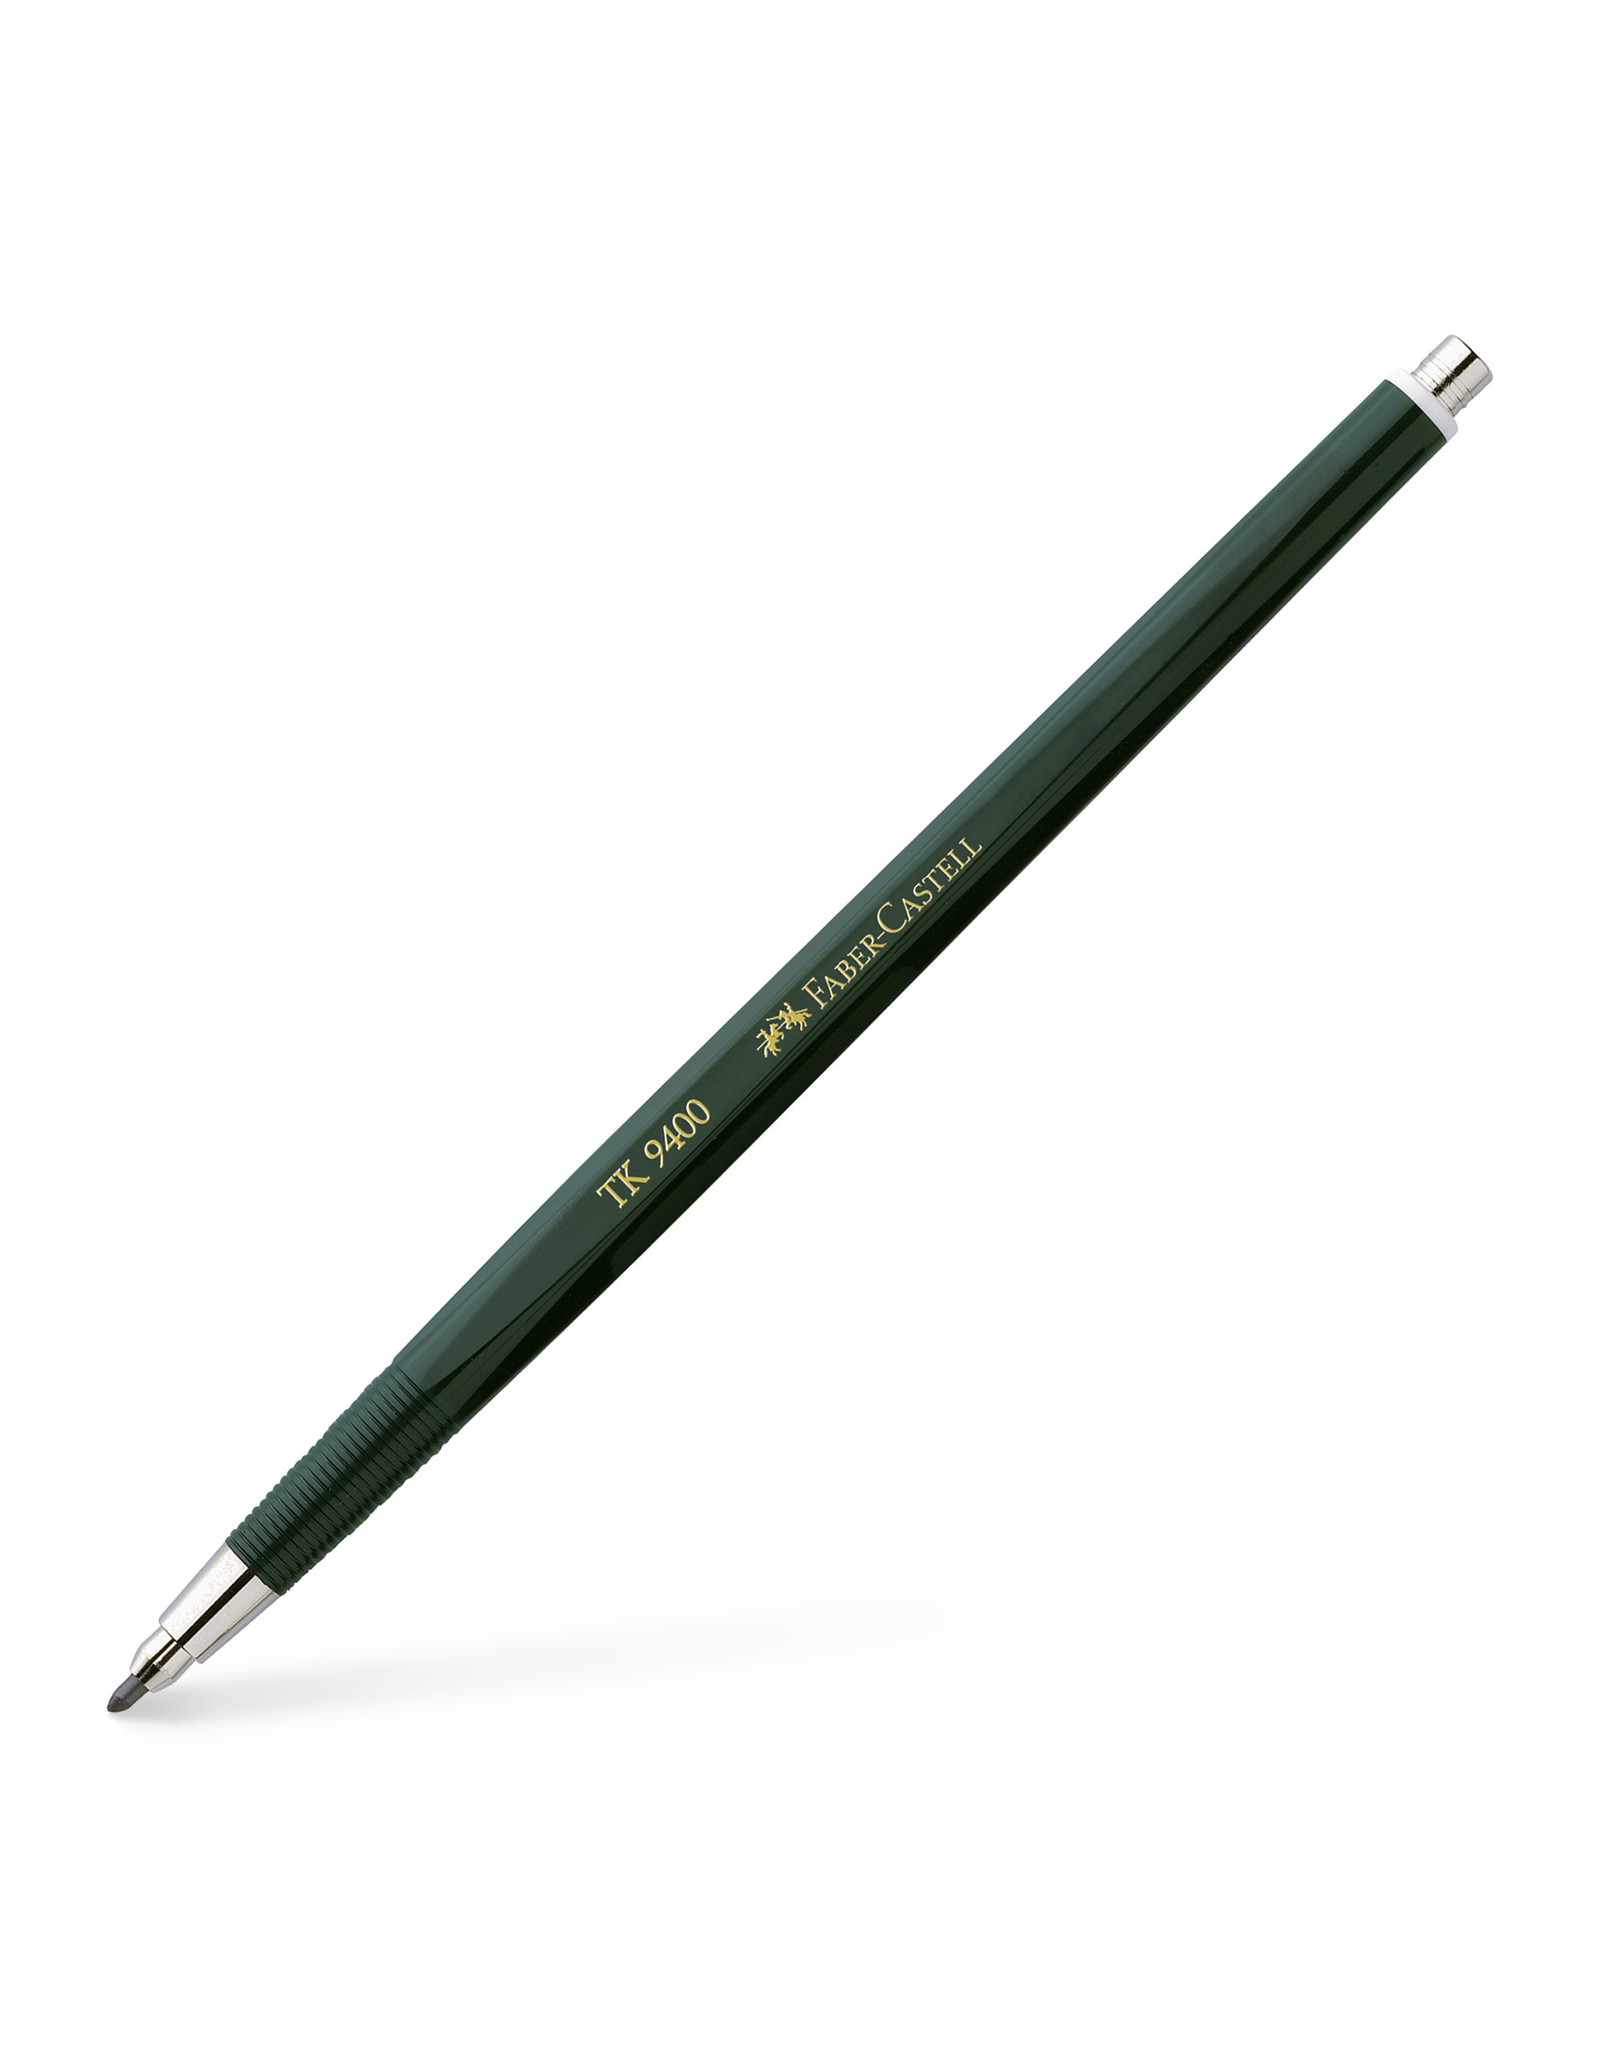 FABER-CASTELL Faber-Castell TK 9400 Clutch Drawing Pencil